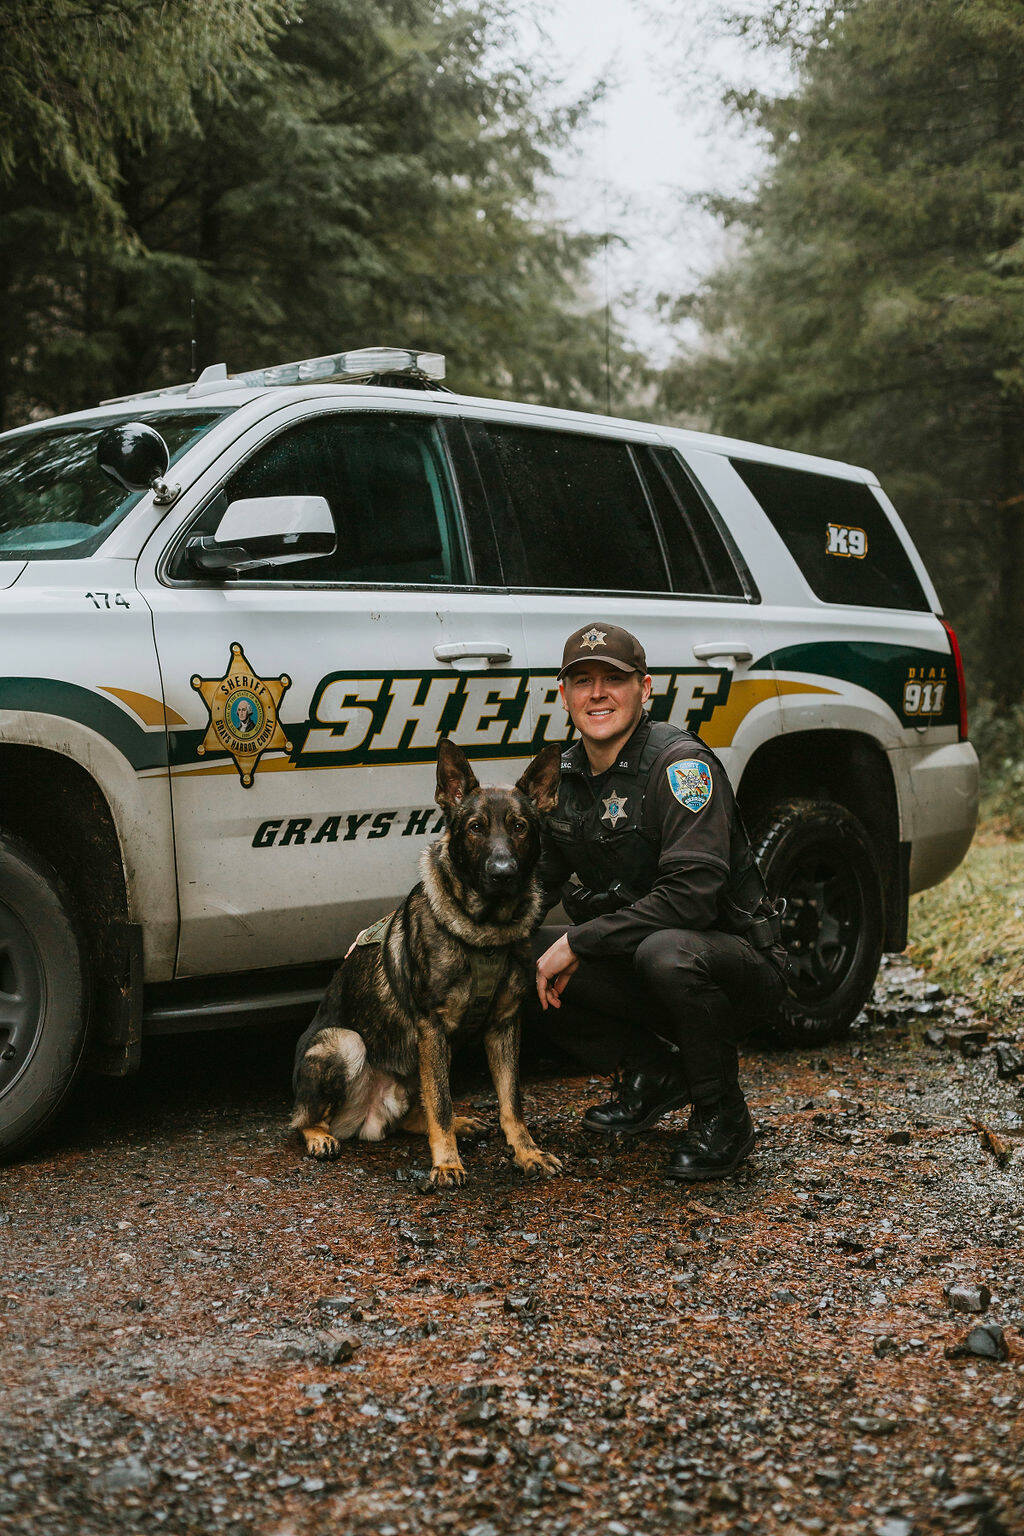 Grays Harbor County Sheriff’s Deputy Sean McKechnie and working dog Titus tracked a suspect through nearly 500 yards of brush following a road rage incident involving a gun on Thursday. (Courtesy photo / GHCSO)